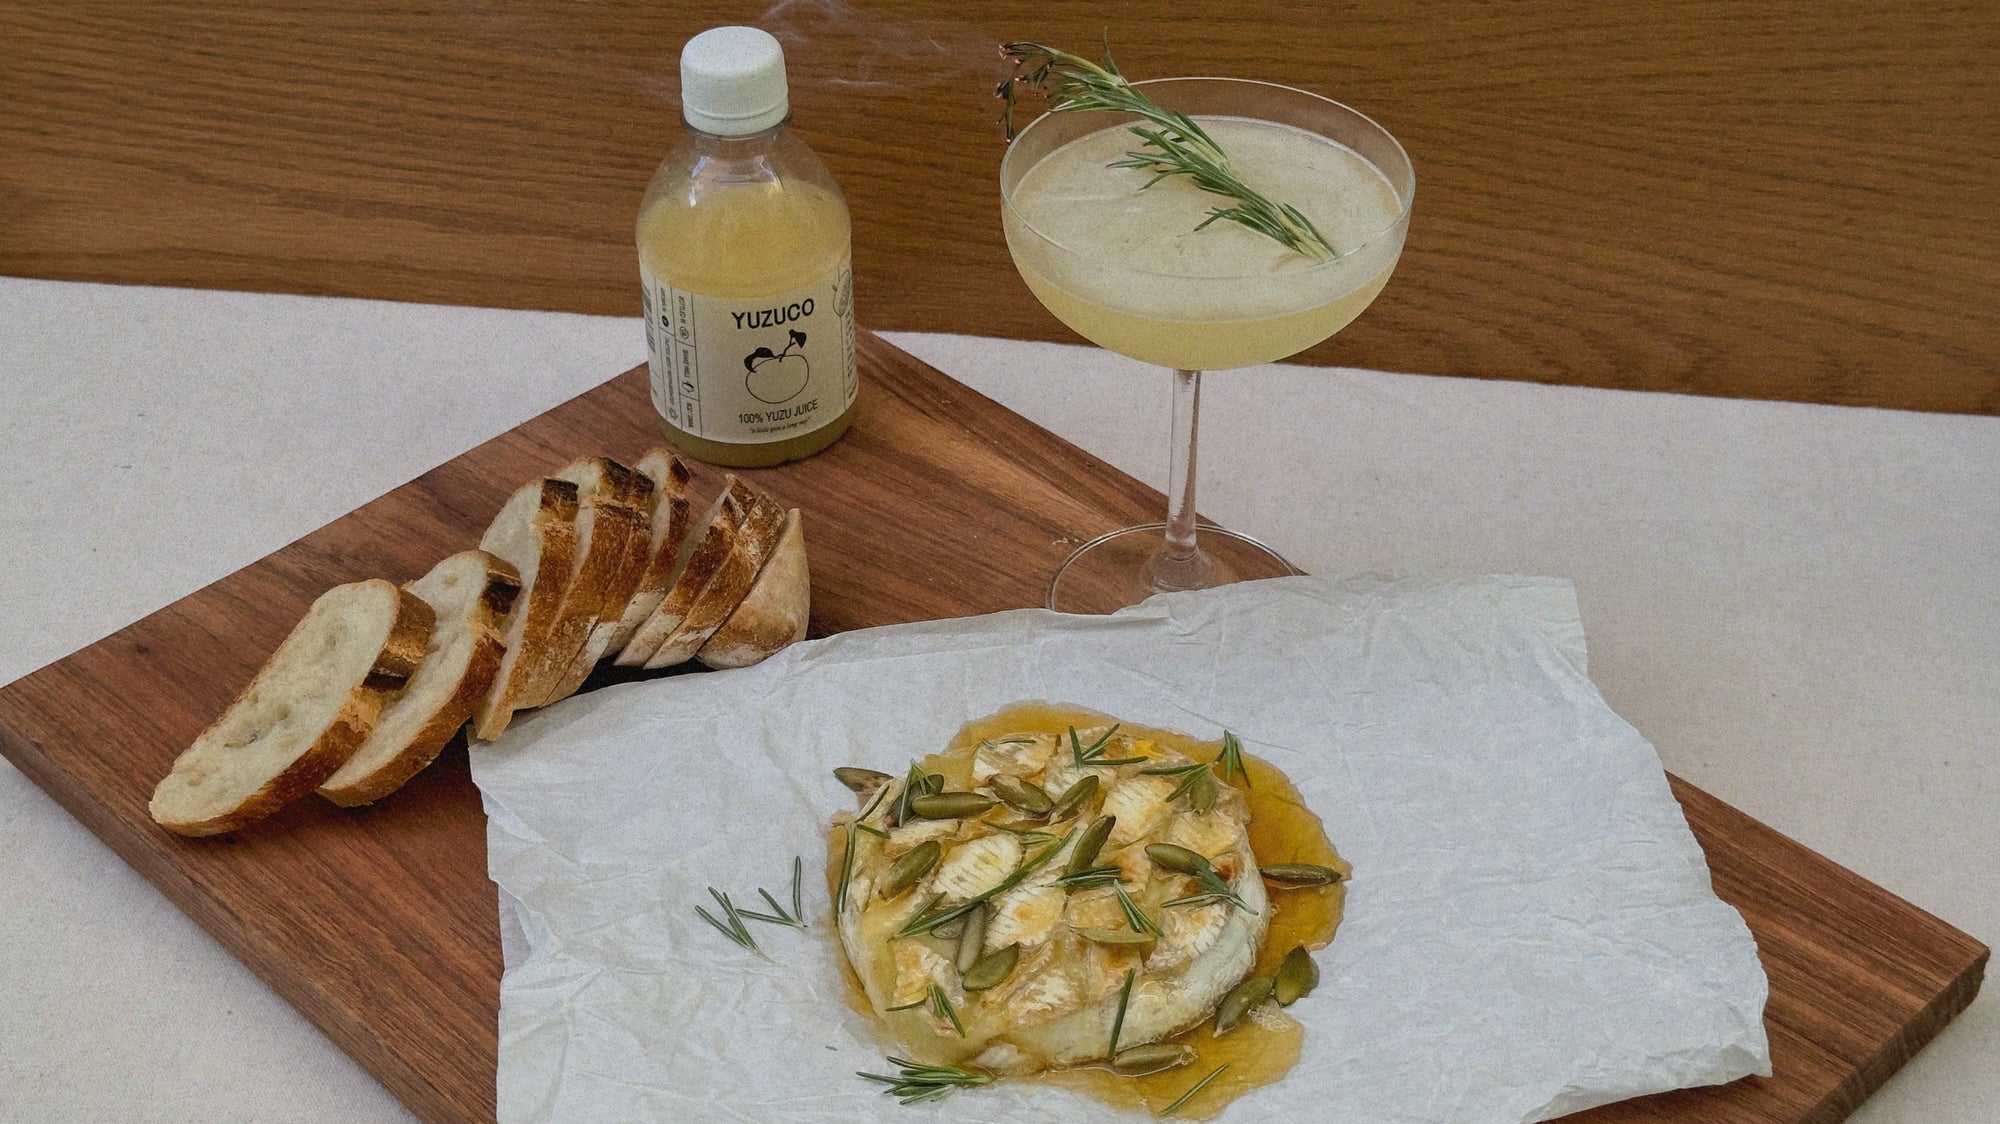 100% yuzu juice from yuzuco next to a sliced baguette a yuzu bees knees cocktial with fresh rosemary and a beautiful yuzu-honey and herb covered baked brie.